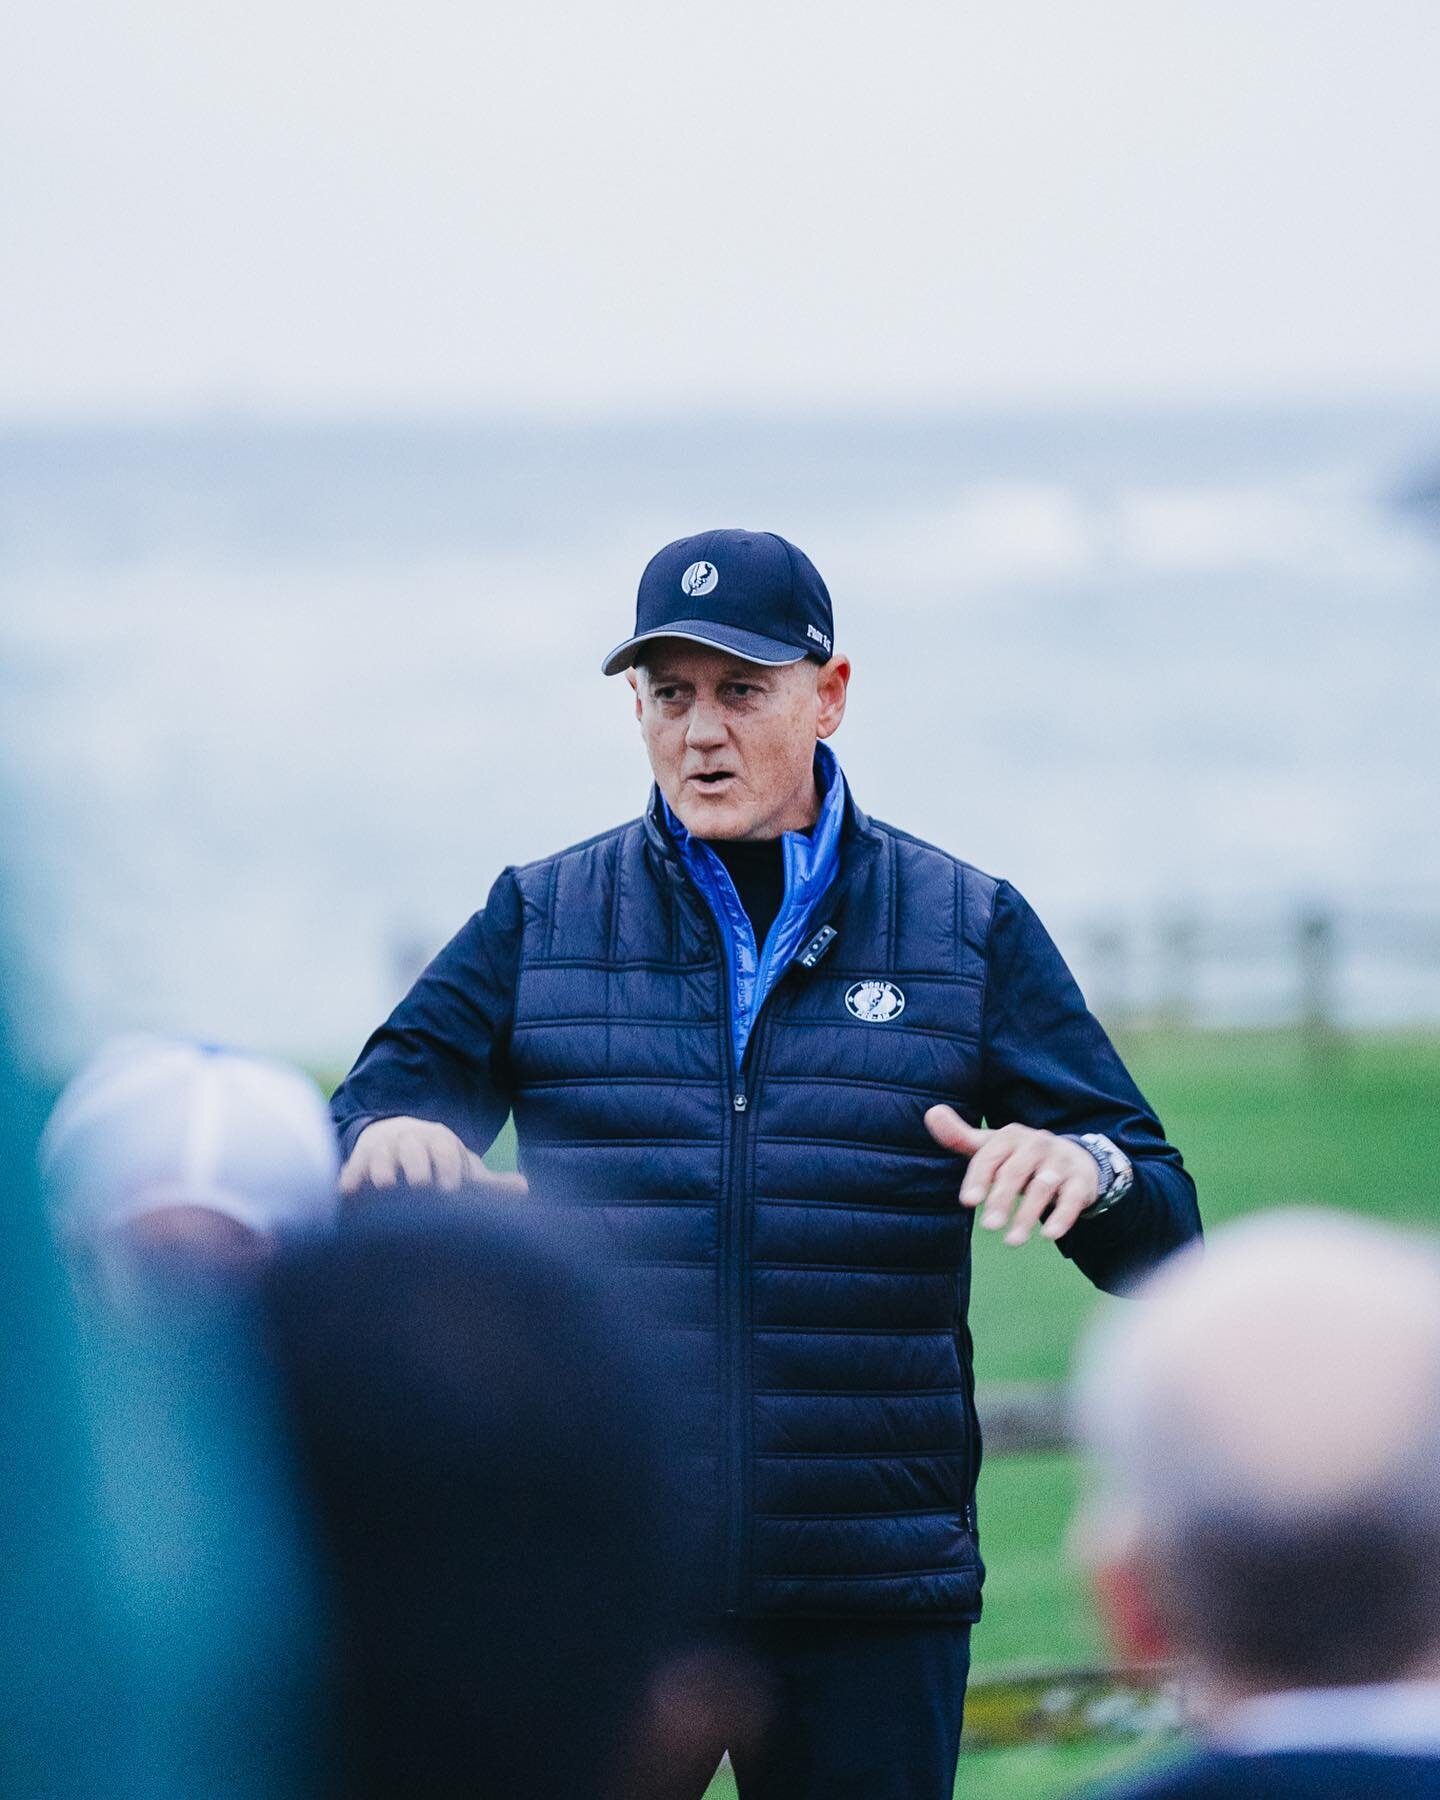 Sunday ✅ 
-
What a great first full day at the 2022 In His Grip World Golf Pro Am. Thanks to @scottnlehman for encouraging us at our Sunrise Service, and to Ferguson Enterprises for sponsoring our breakfast together at The Beach Club.
-
#inhisgrip